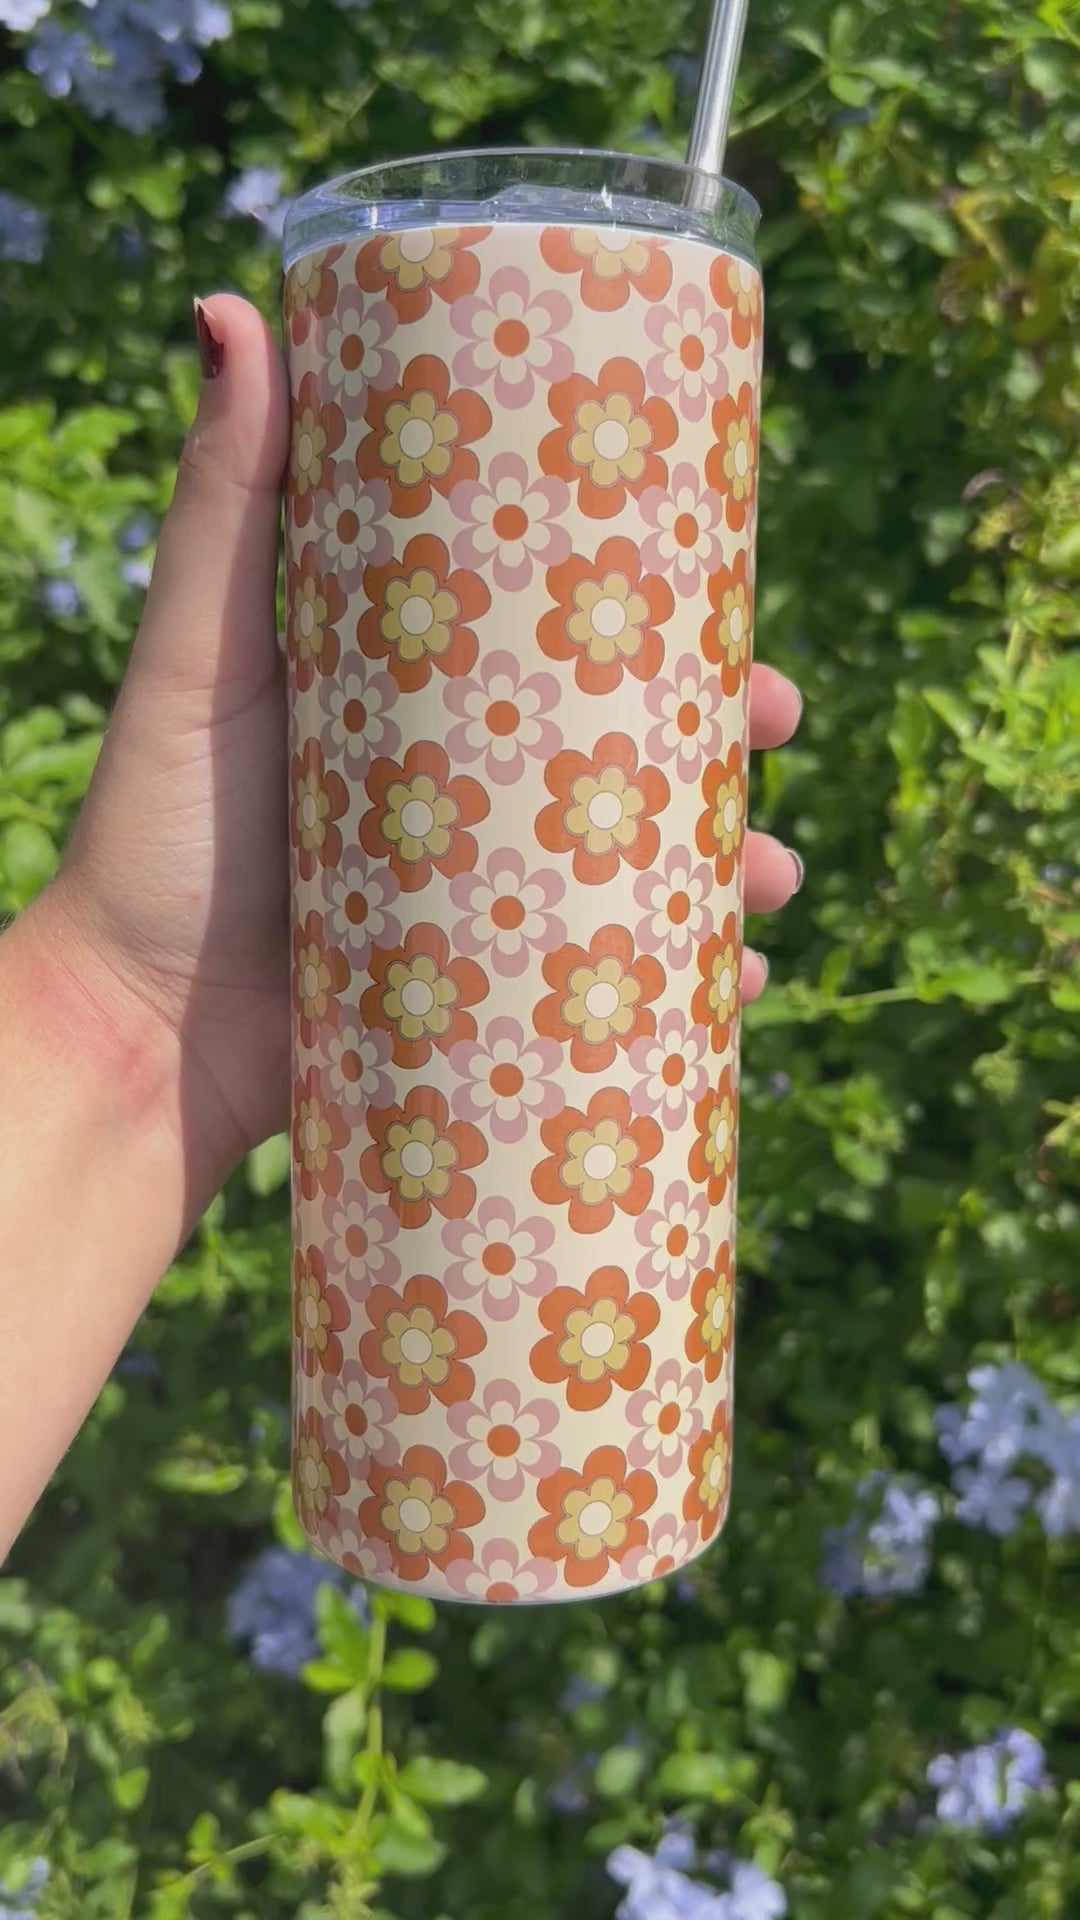 70s dream tumbler, 20 oz with metal straw